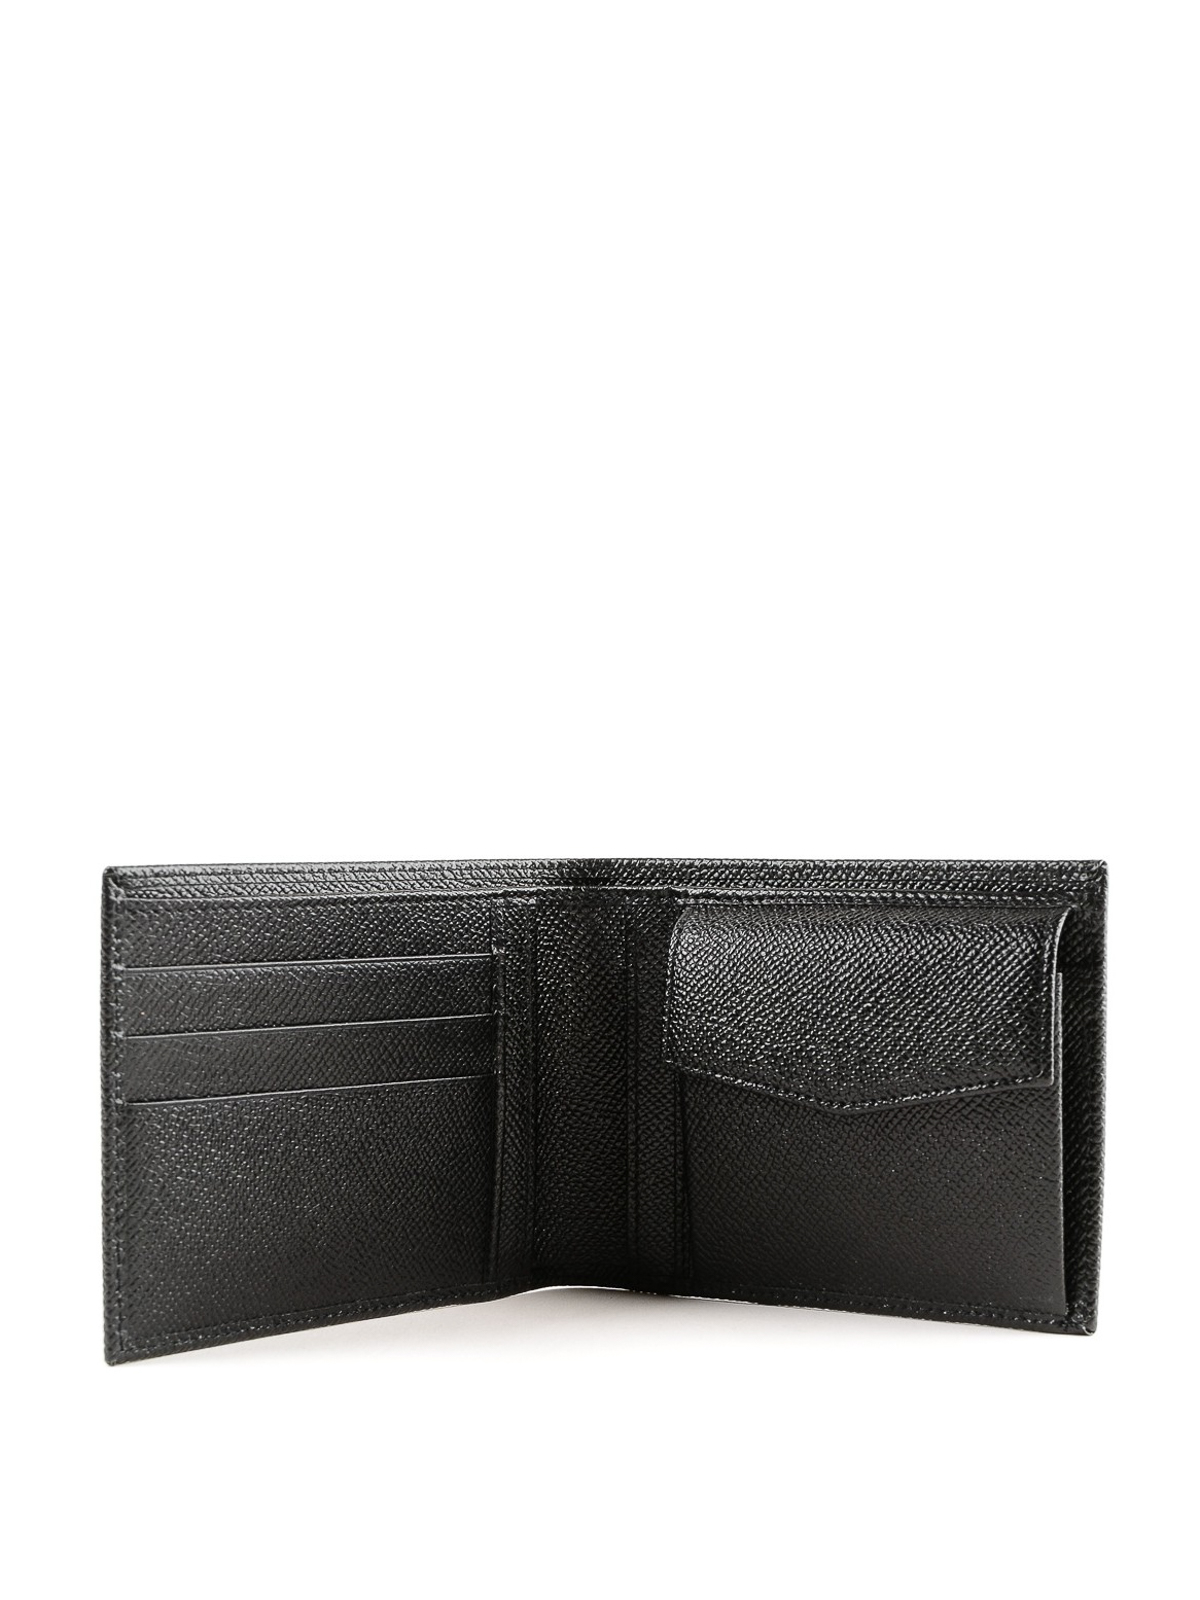 Wallets & purses Dolce & Gabbana - Dauphine leather Milano wallet 